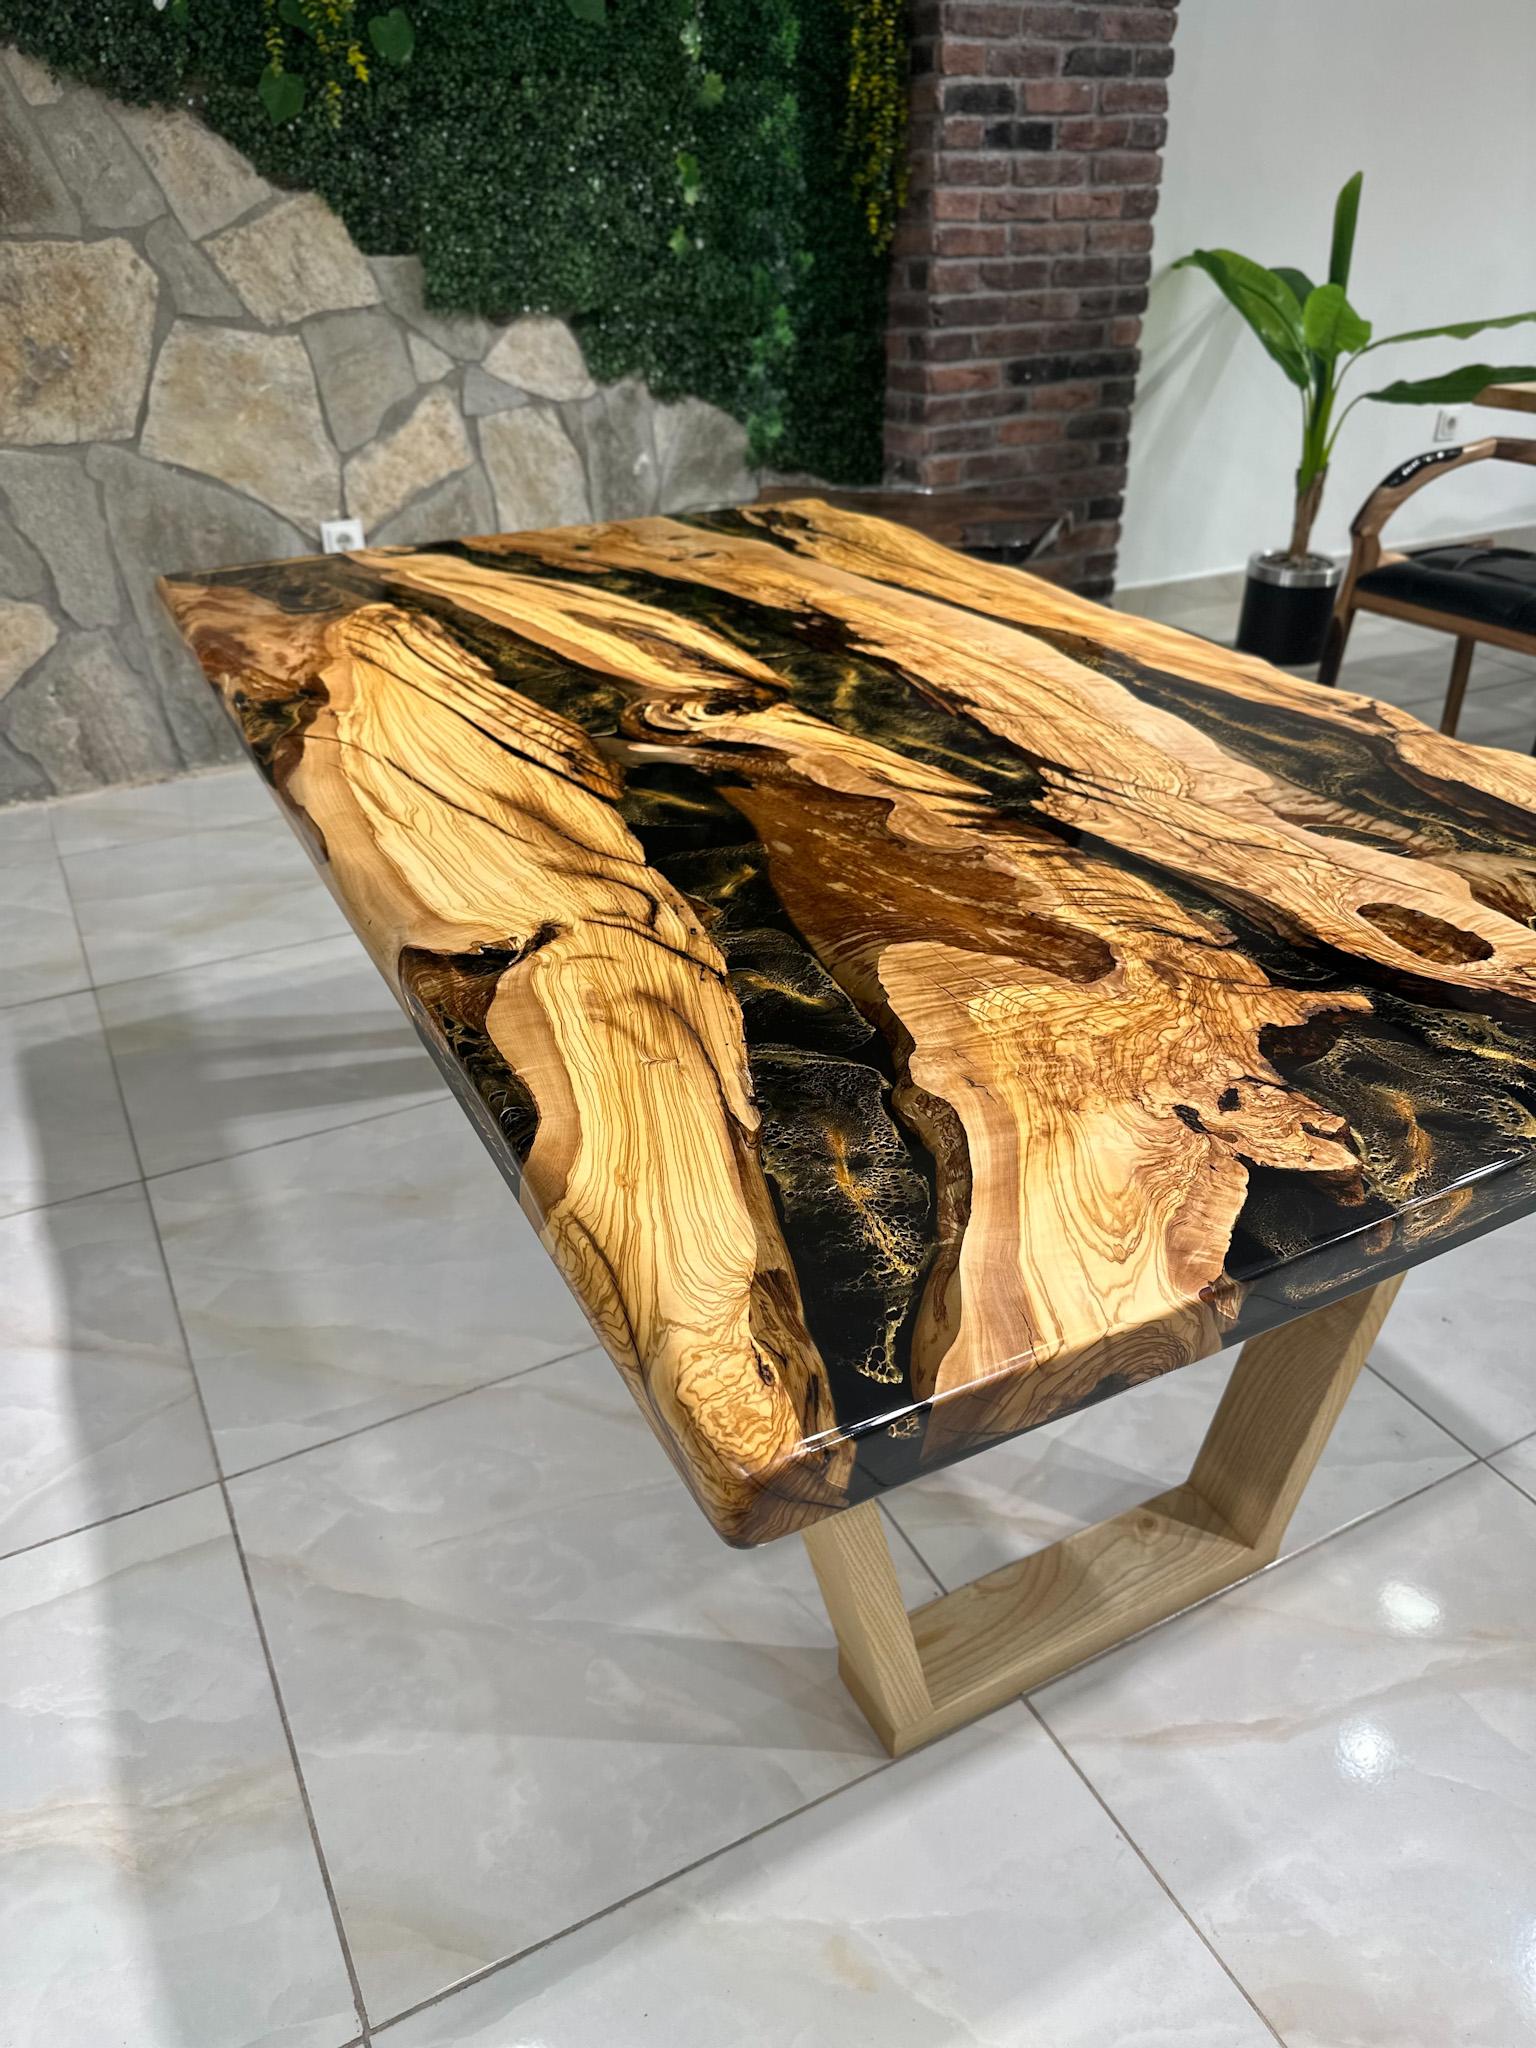 Brushed Olive Wood Live Edge Resin Table - Dining Custom Table - Kitchen Table For Sale